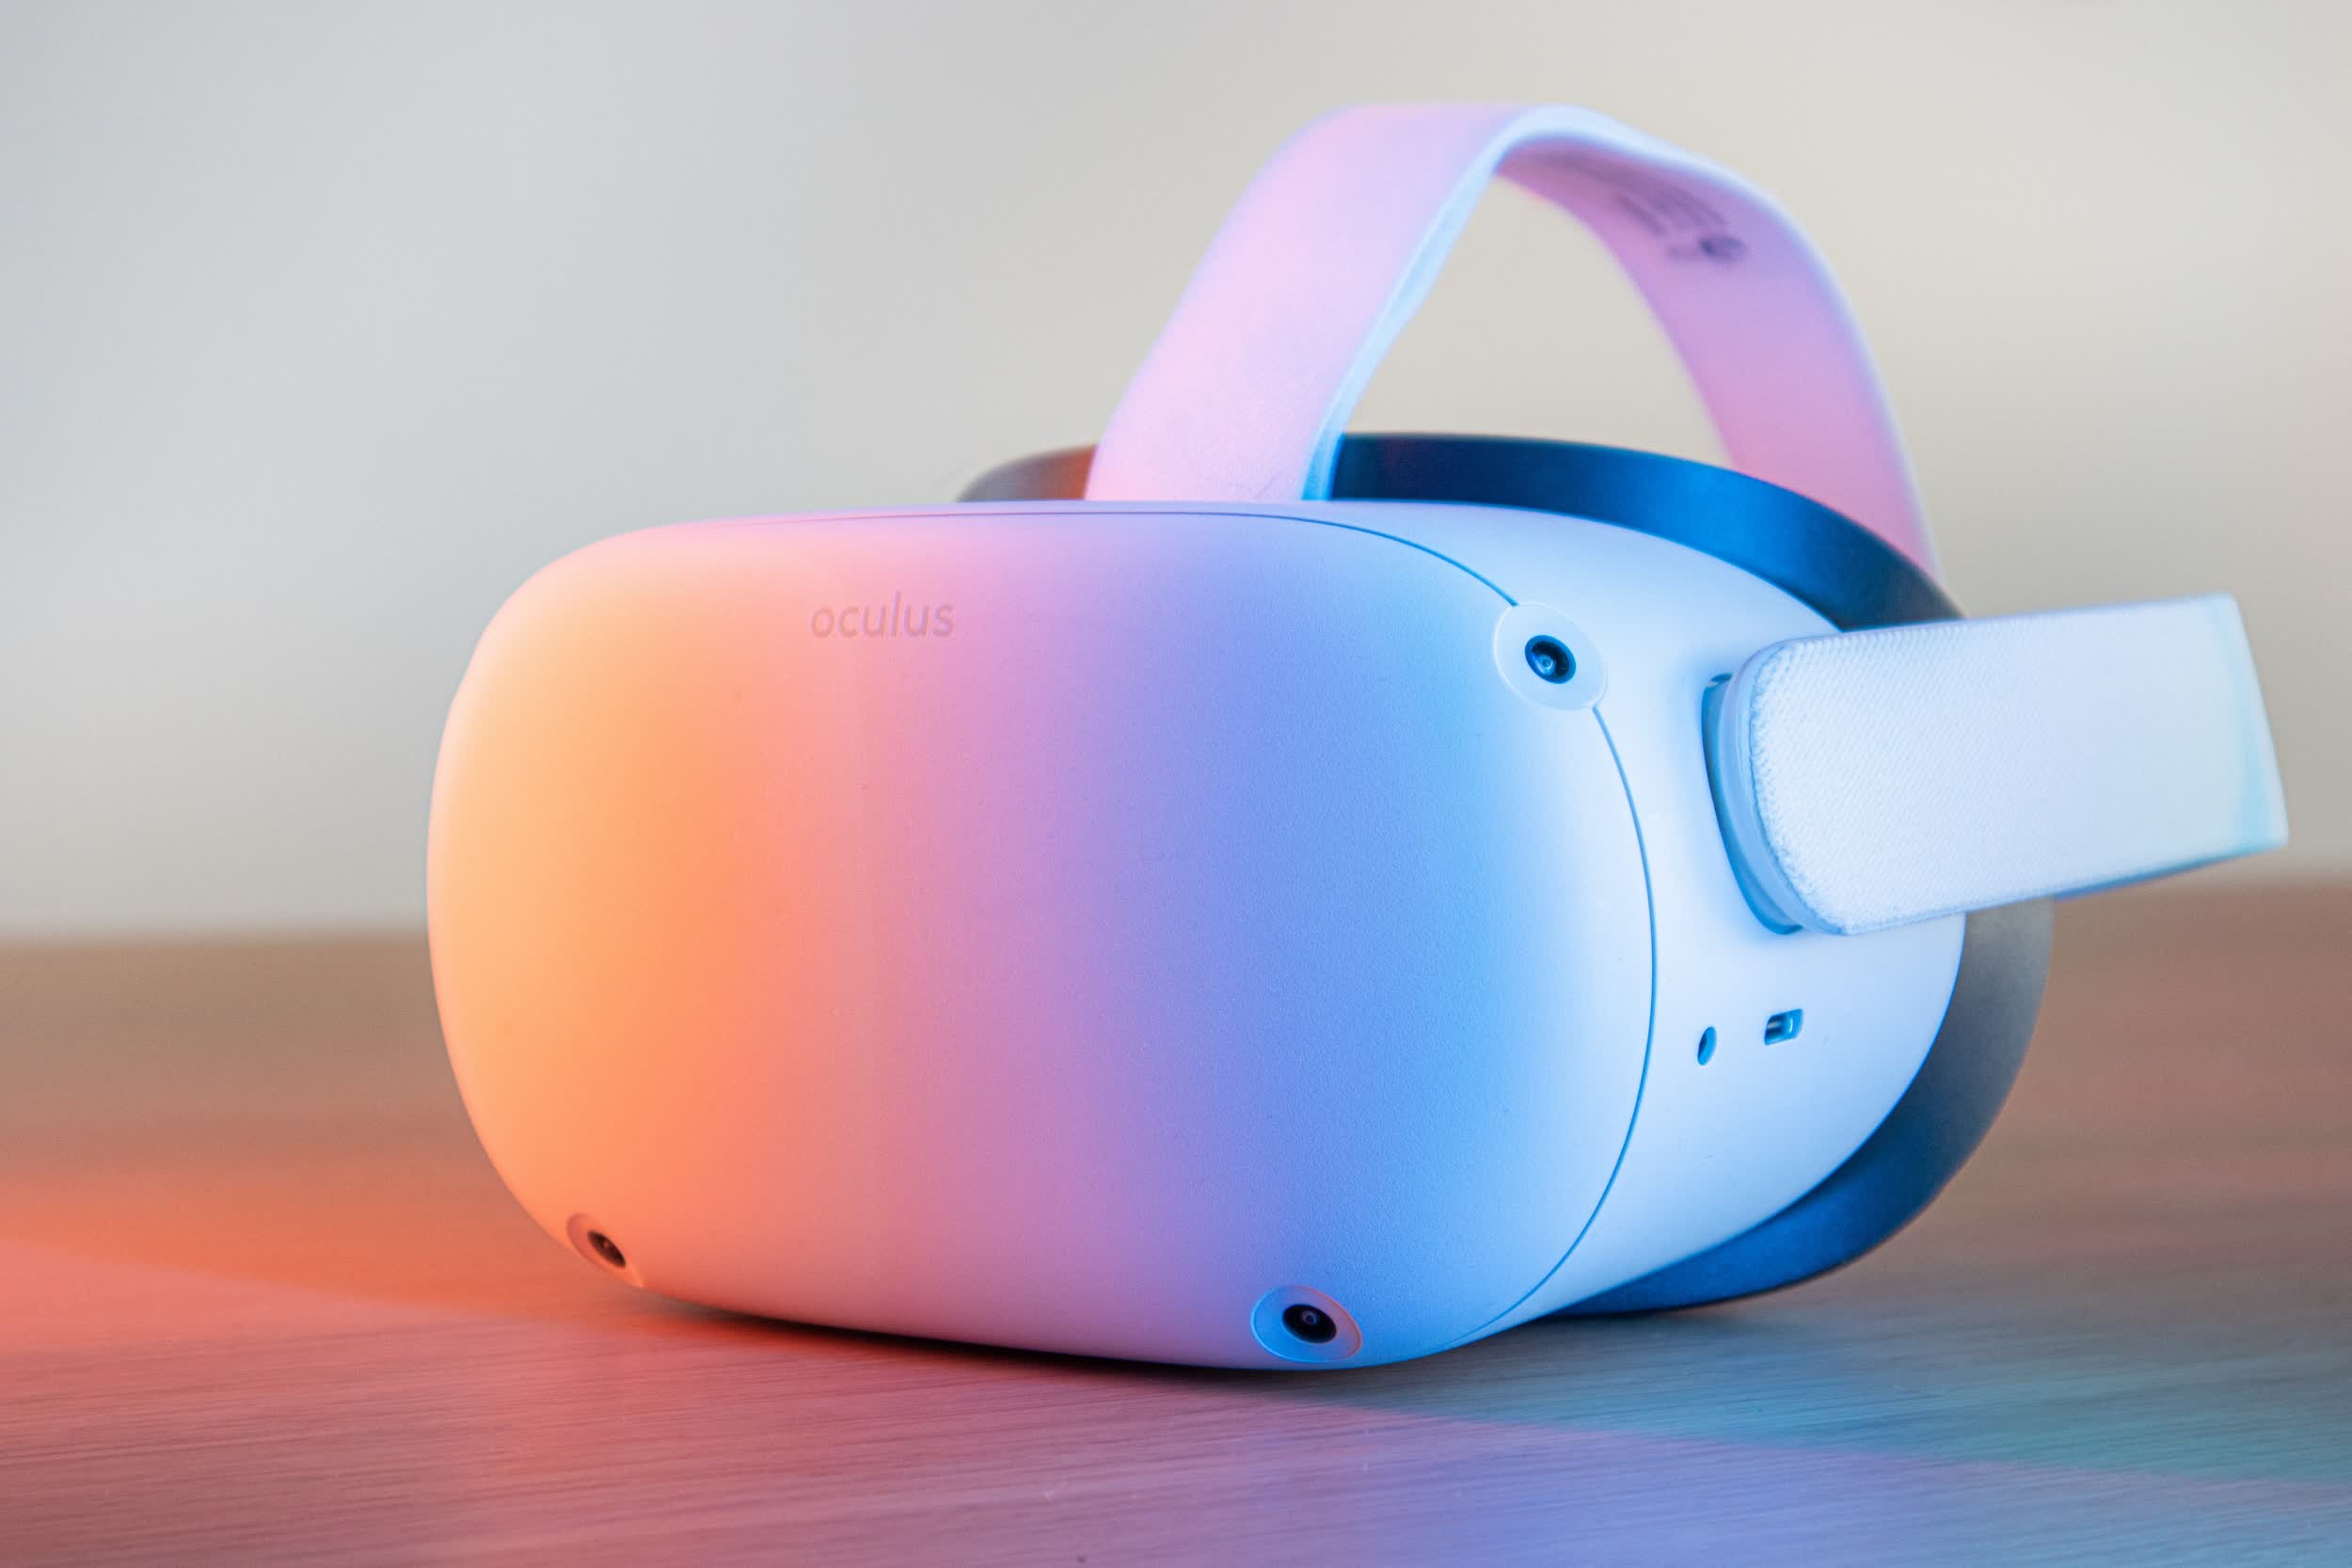 Meta VR headsets to stop requiring Facebook accounts